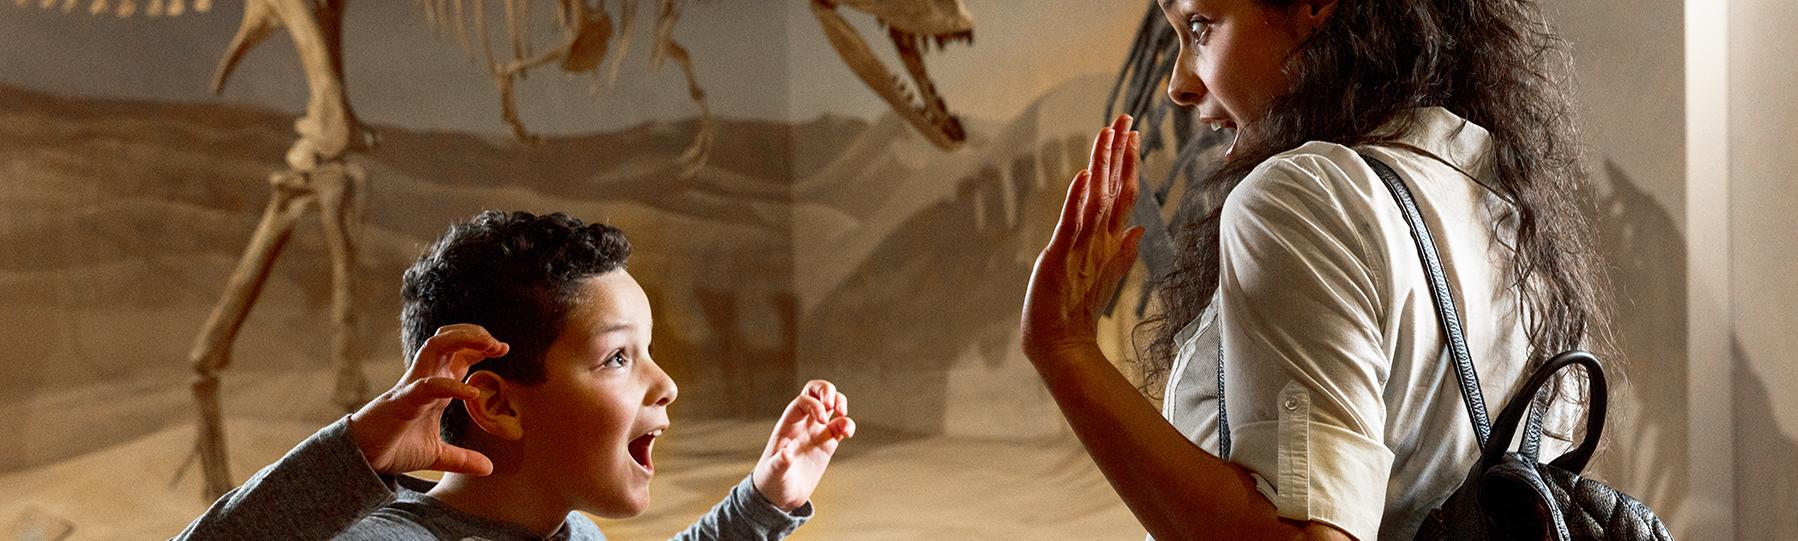 Woman and young boy stand in front of dinosaur skeleton as the boy makes a 'Rawr' face with hands up like dinosaur claws in the direction of the woman